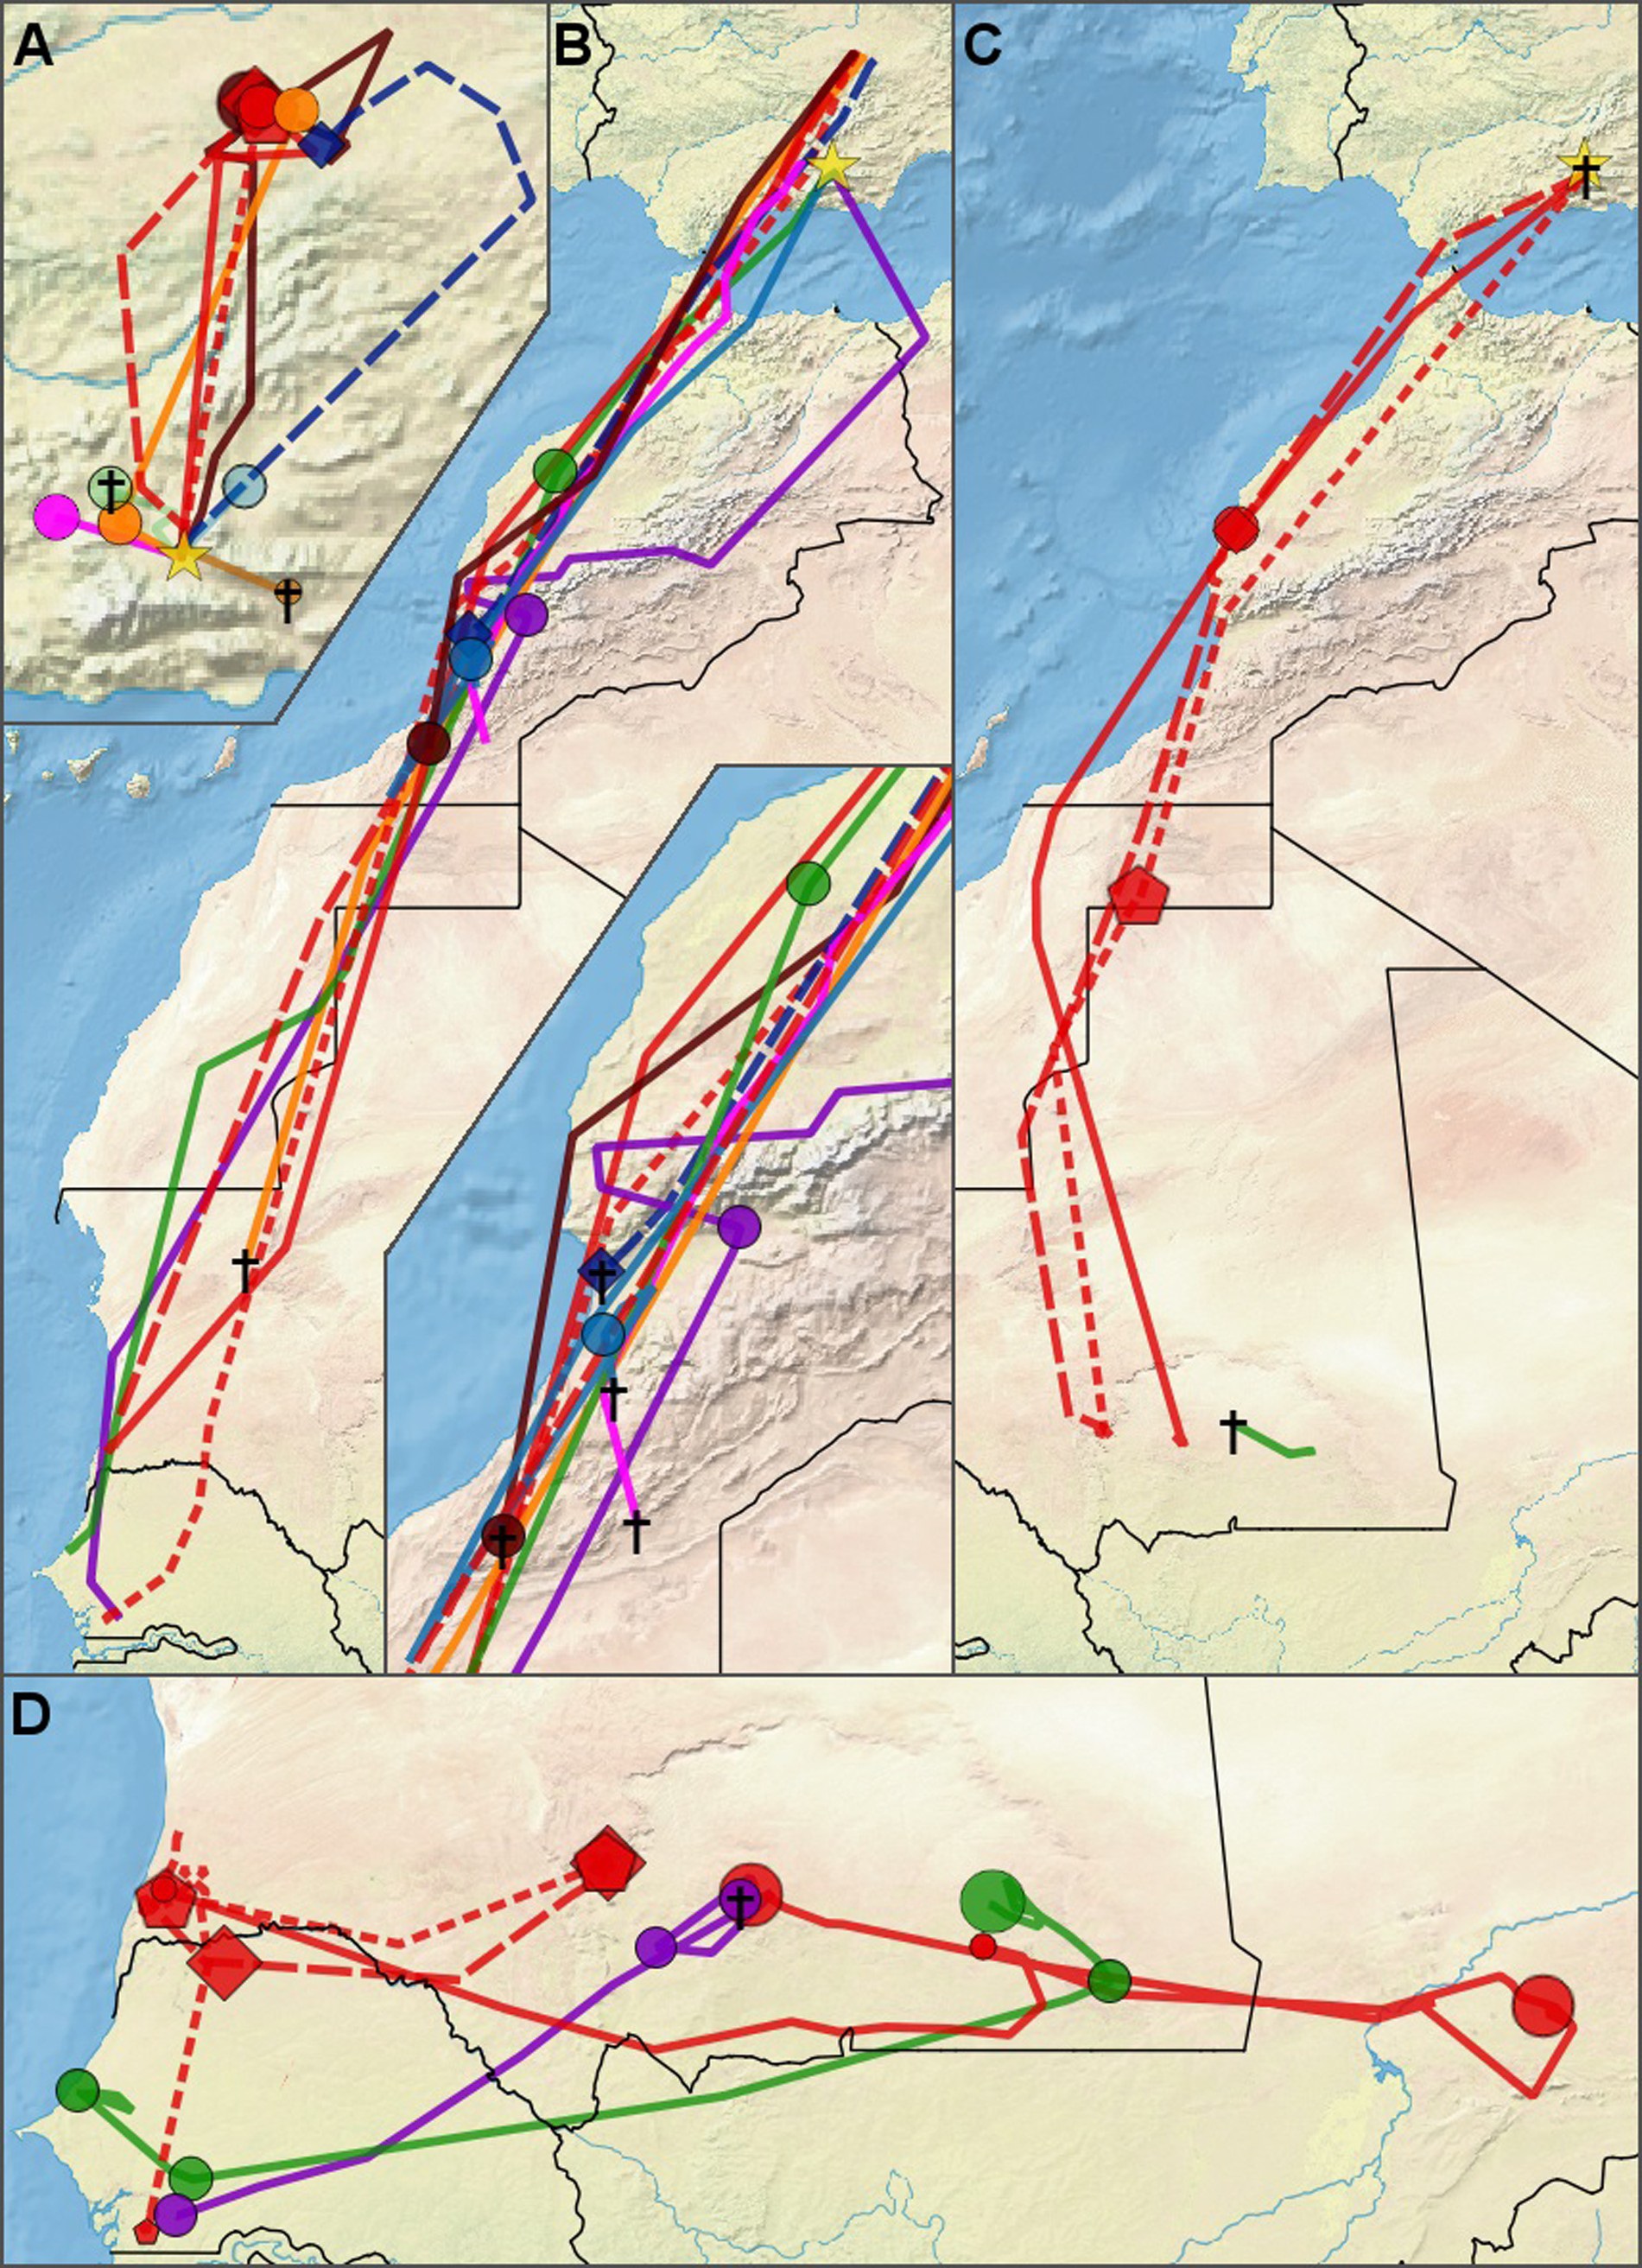 Map of migratory routes of great spotted cuckoos. (A) Pre-migratory movements within Spain. (B) Post-breeding migration (C) Prebreeding migration (D) Wintering area movements. Colors correspond to individual cuckoos, only cuckoos that left the breeding area are included in this map. (Credit University of Groningen)